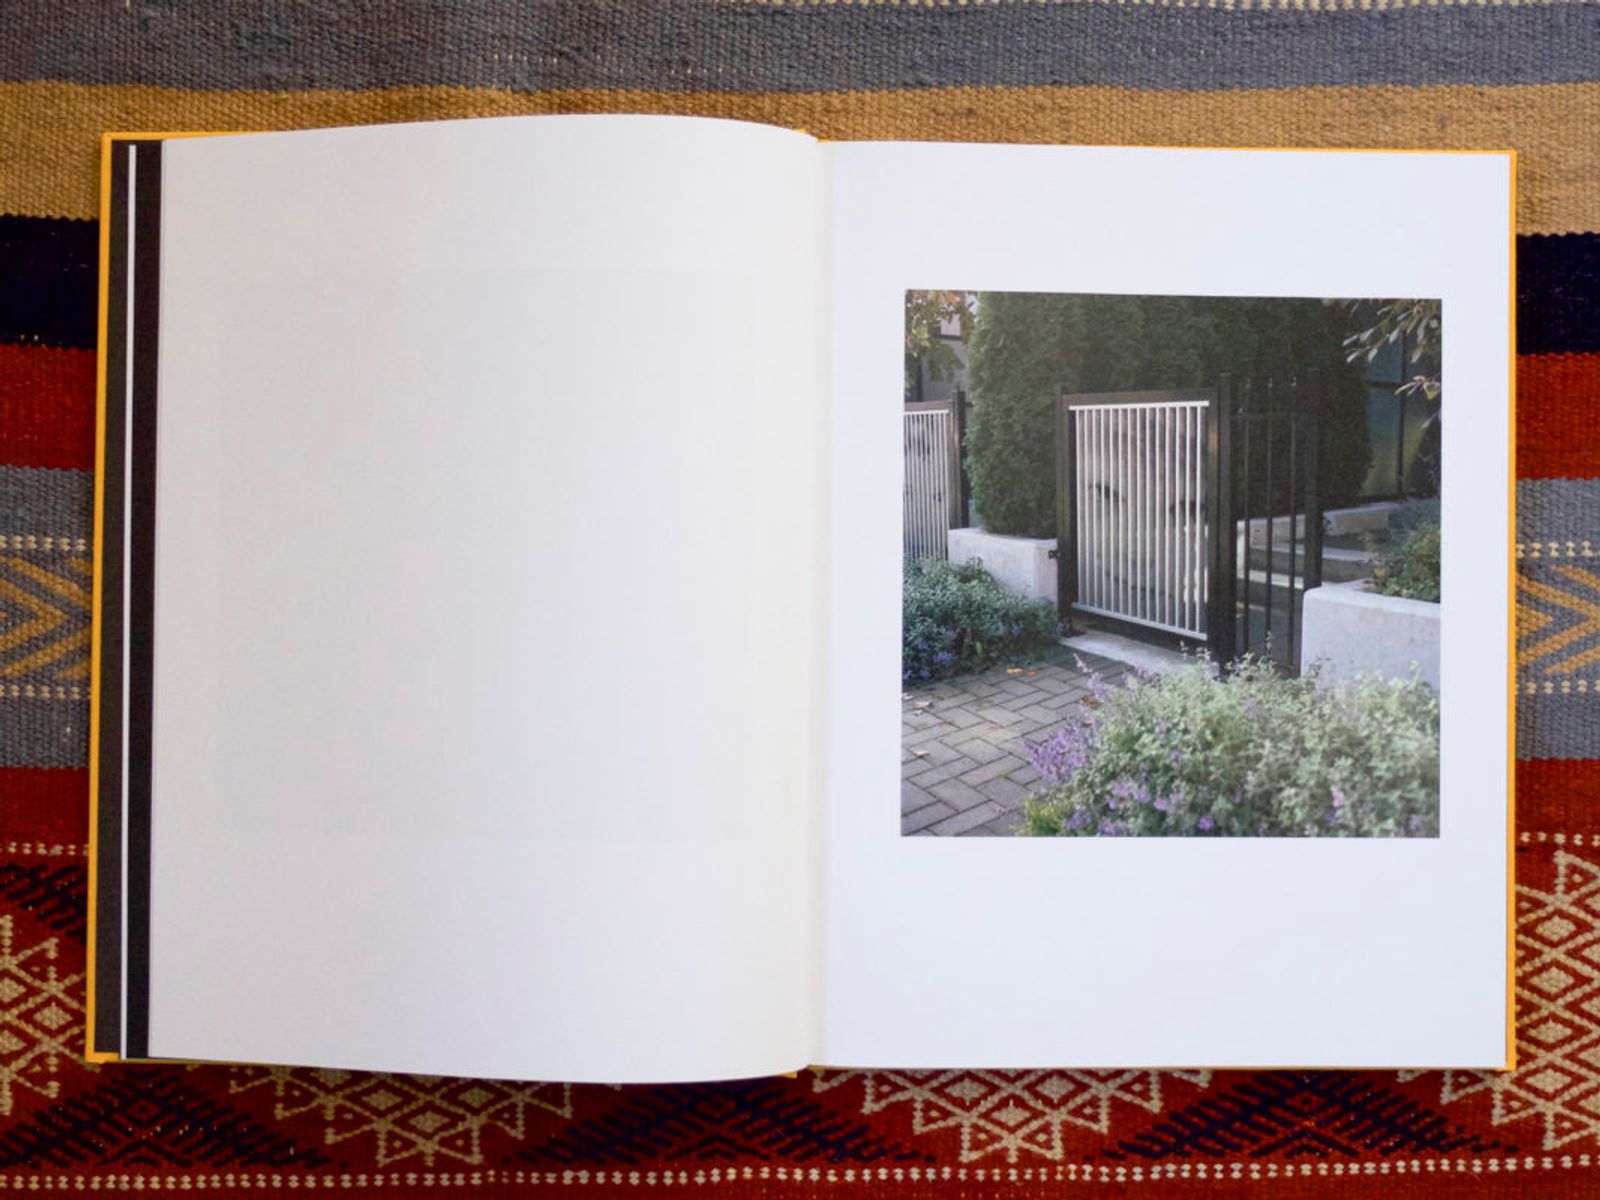 © Leporello Books - Image from the PICTURE SUMMER ON KODAK FILM by Jason Fulford photography project